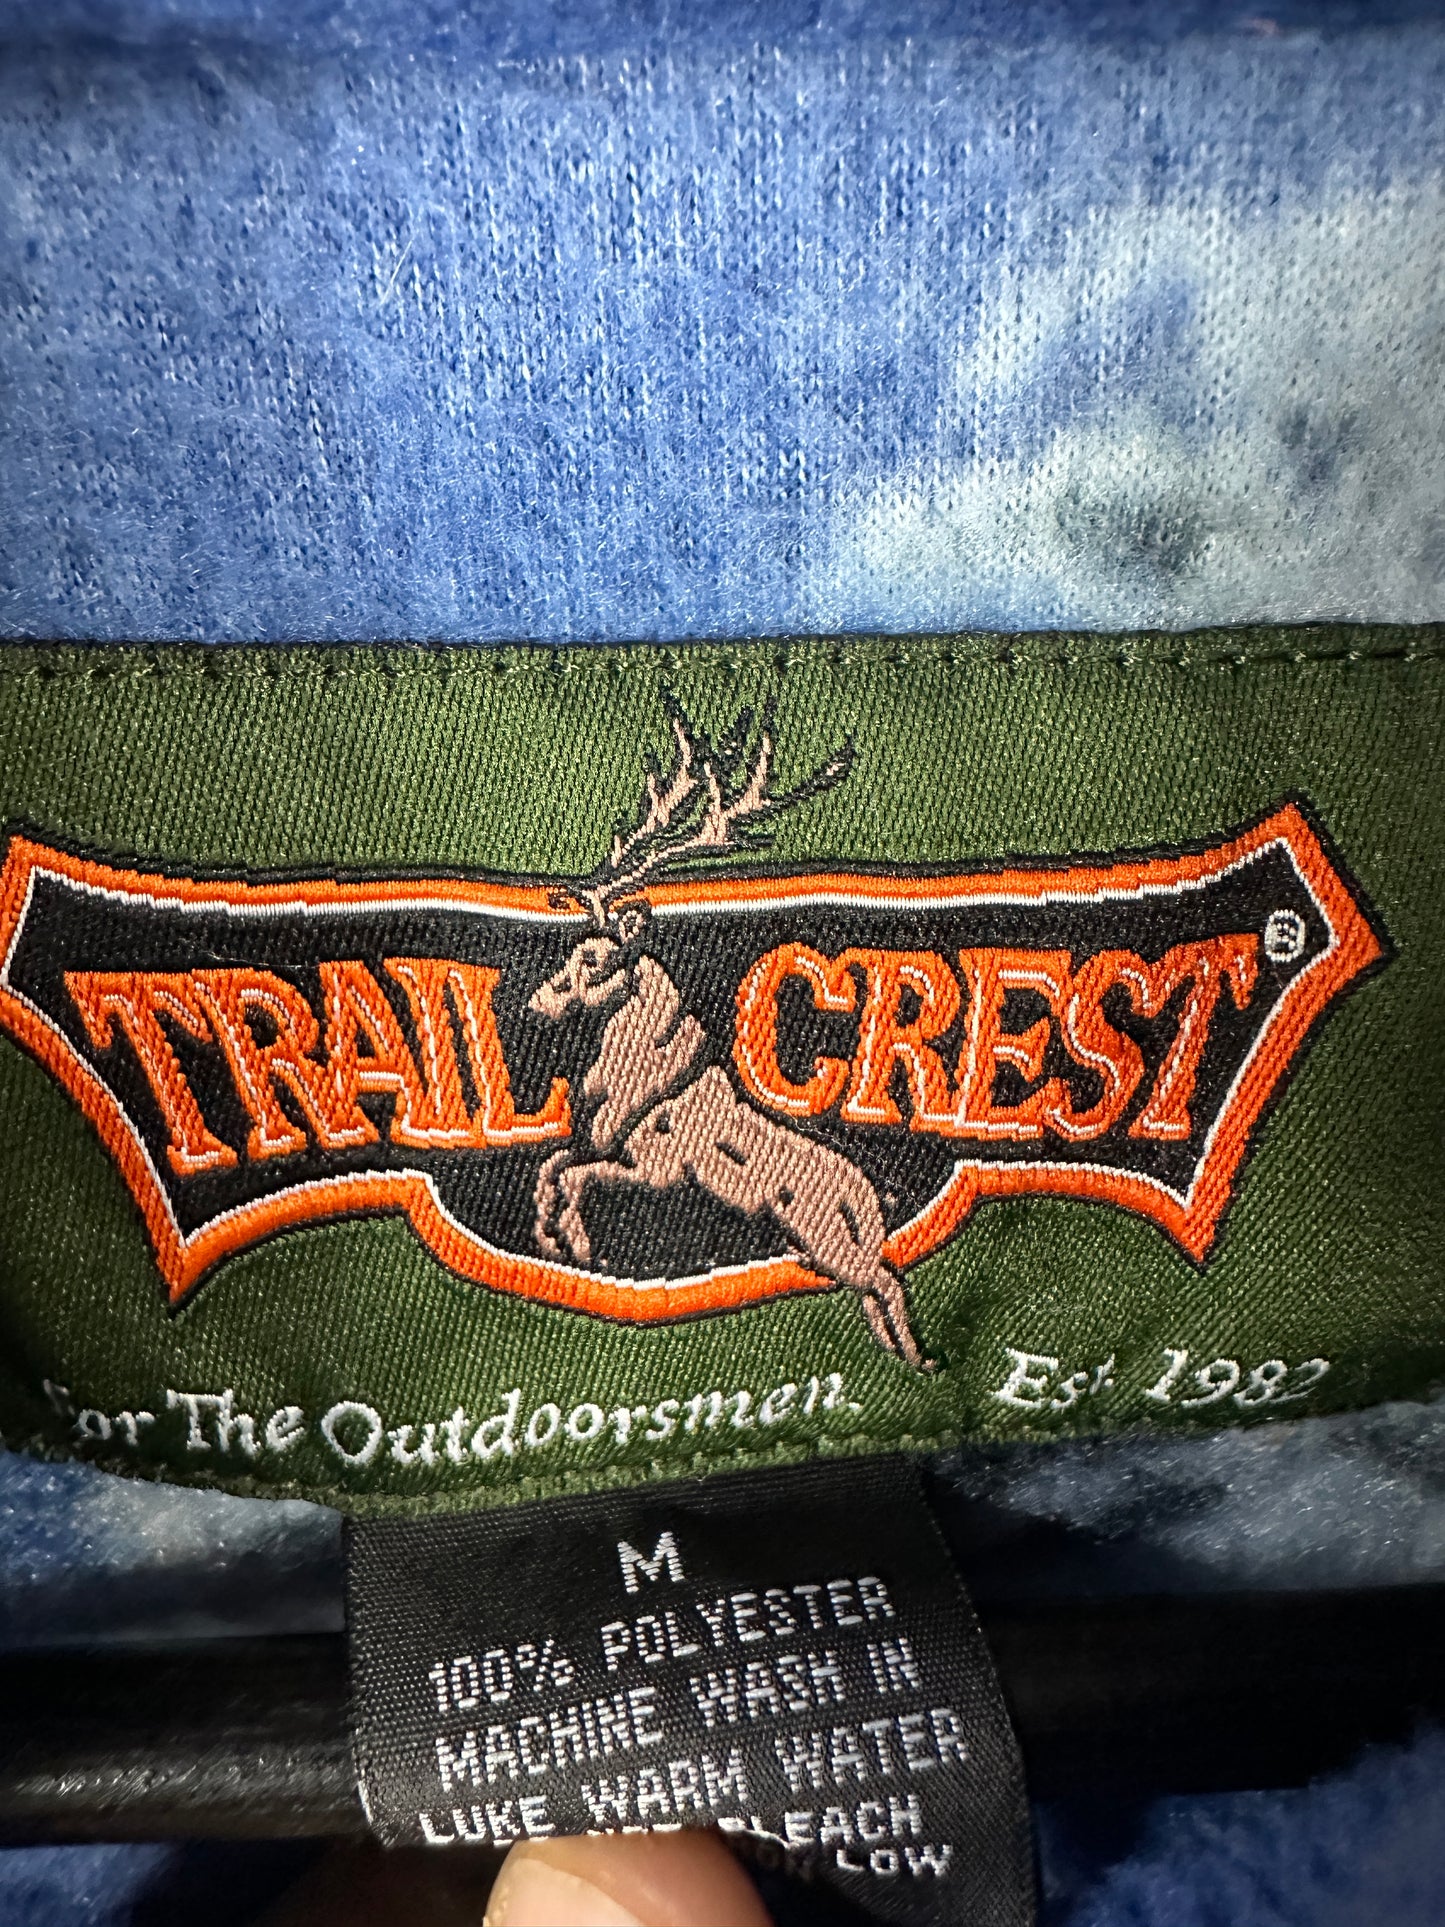 Load image into Gallery viewer, Trail Crest Black Bear All Over Print Full Zip Fleece Jacket Sz Med
